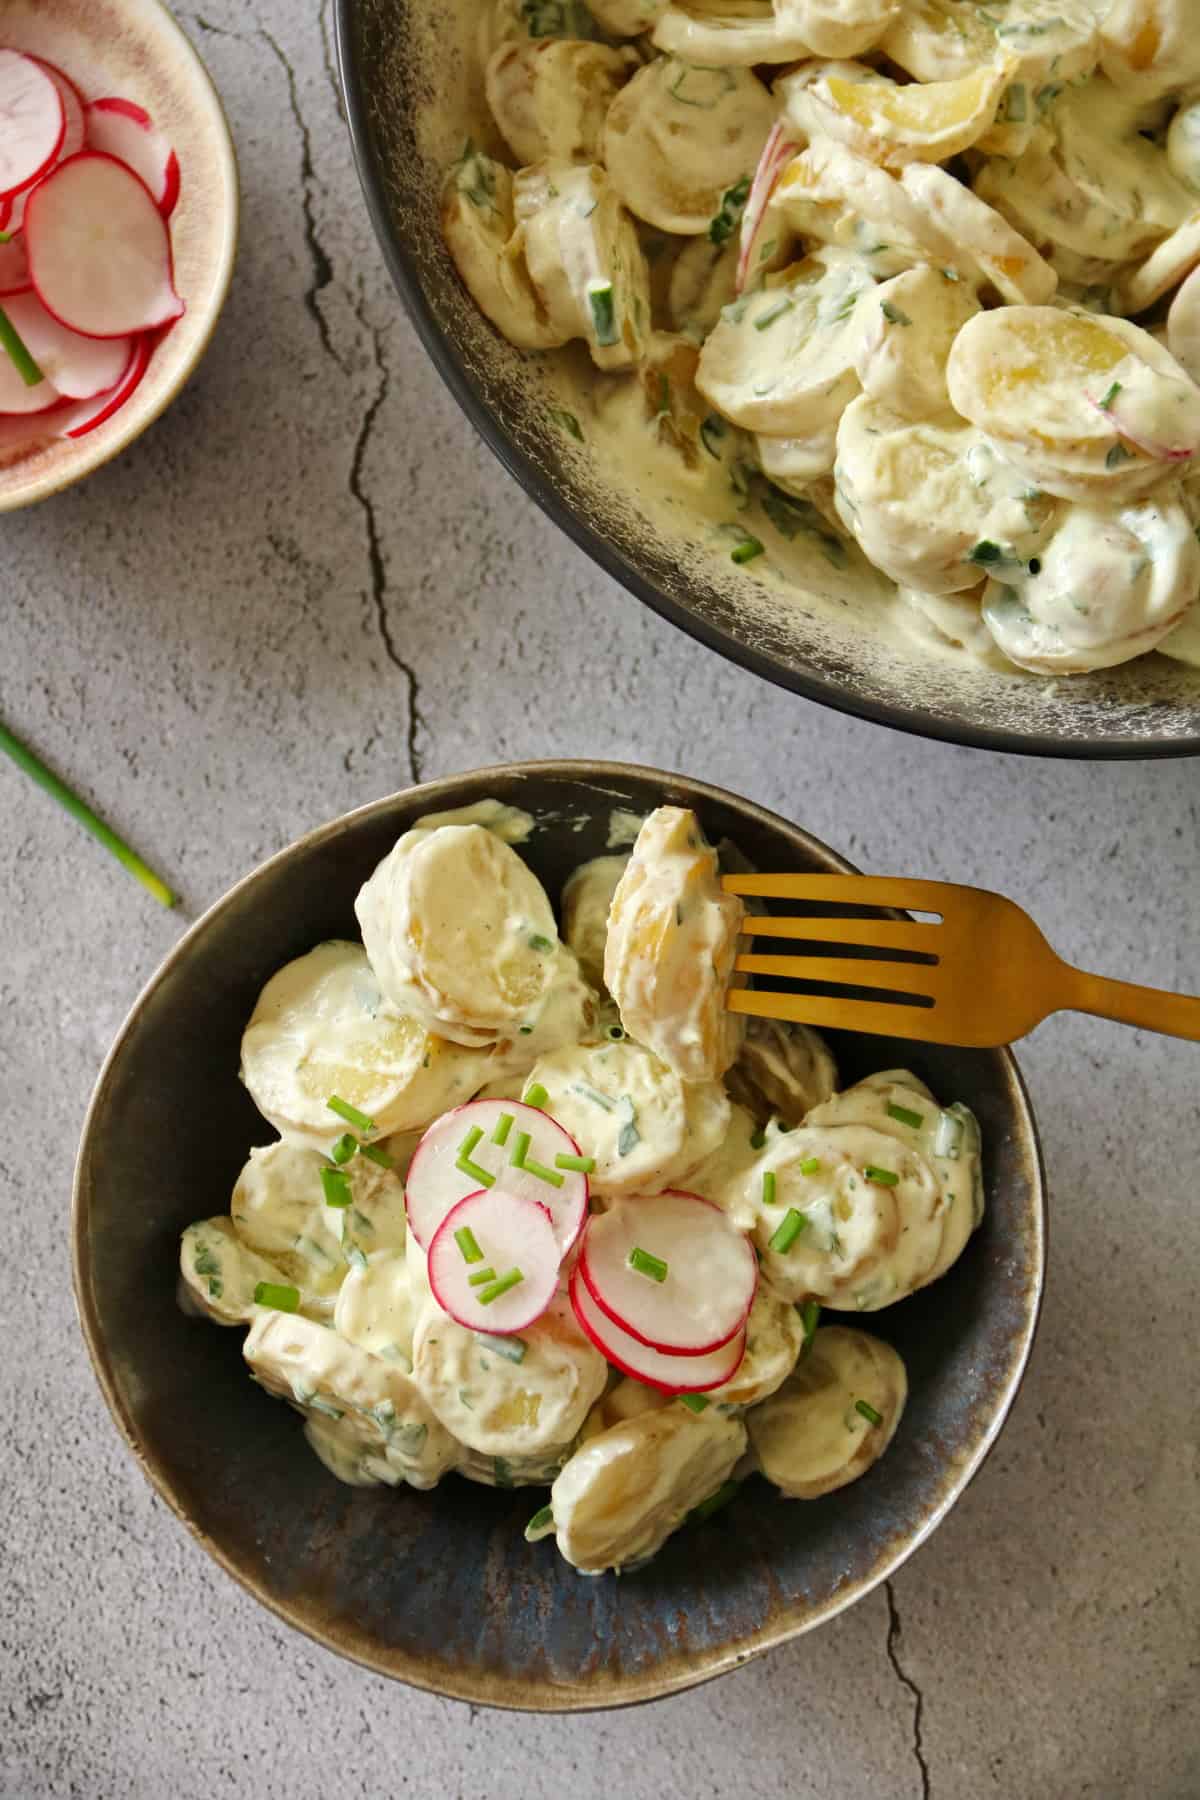 A bowl of potato salad. Top with a small bowl of radishes and a bowl of potato salad